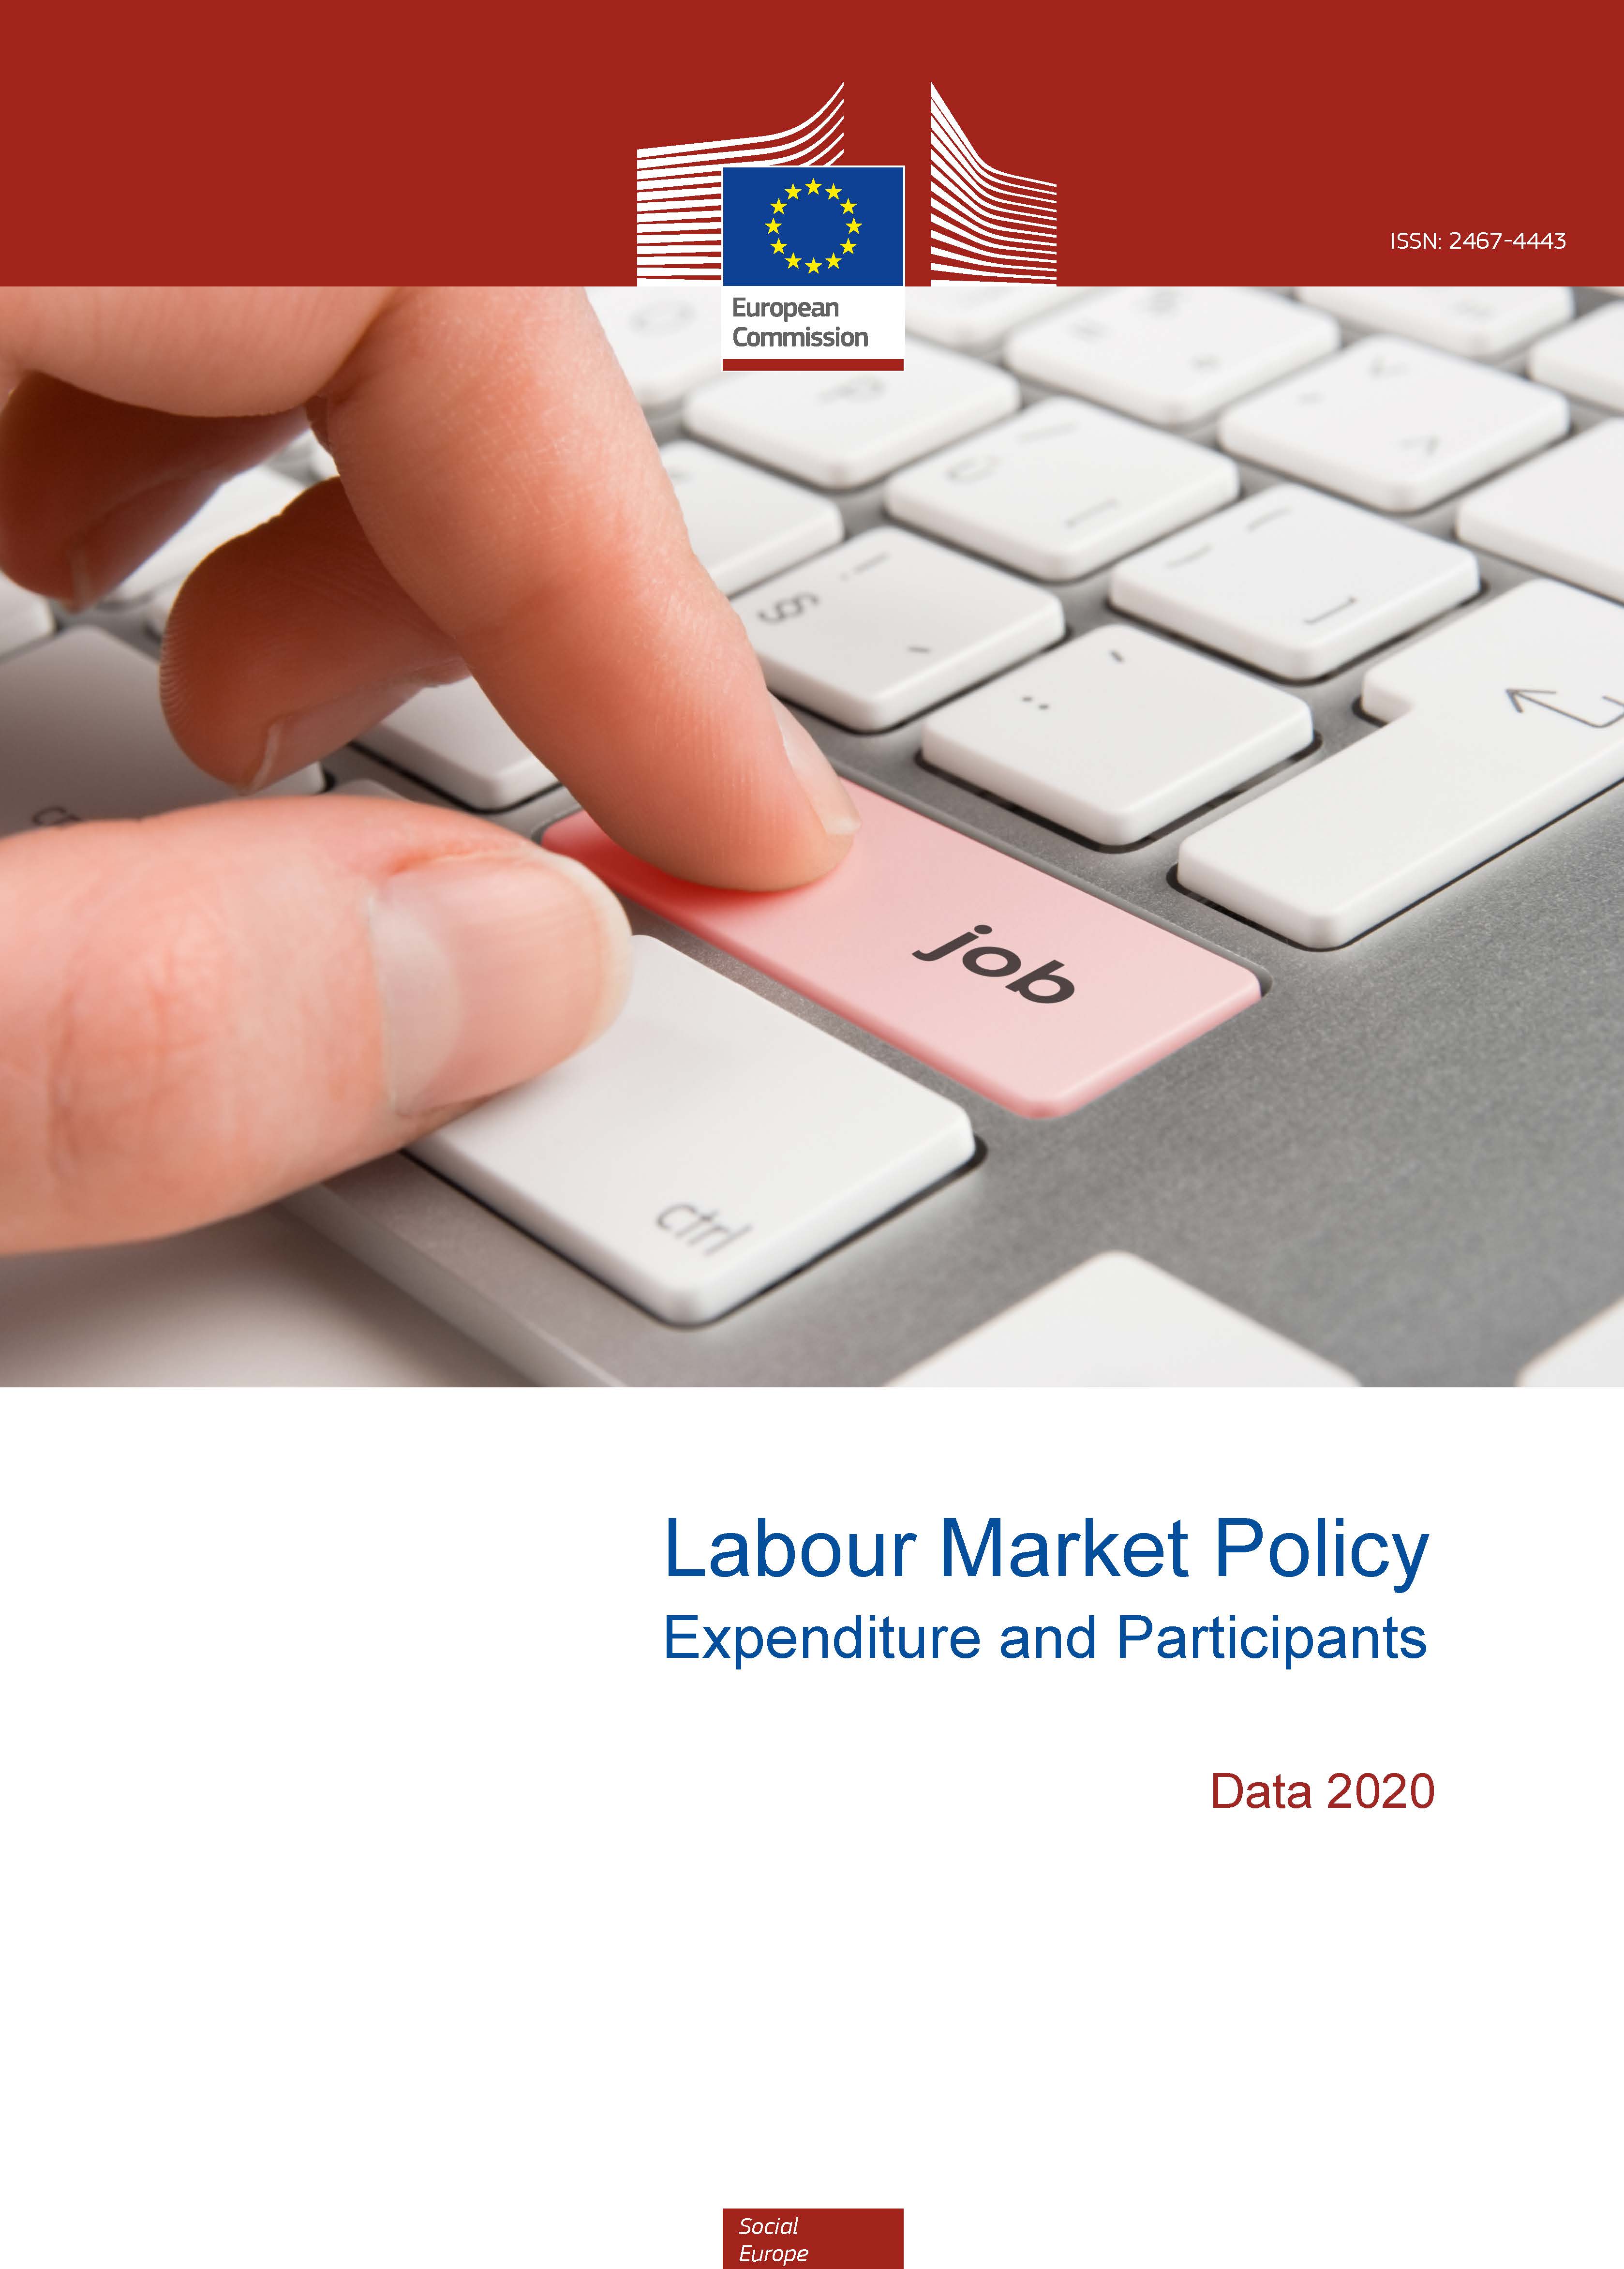 Labour market policy - Expenditure and participants - Data 2020